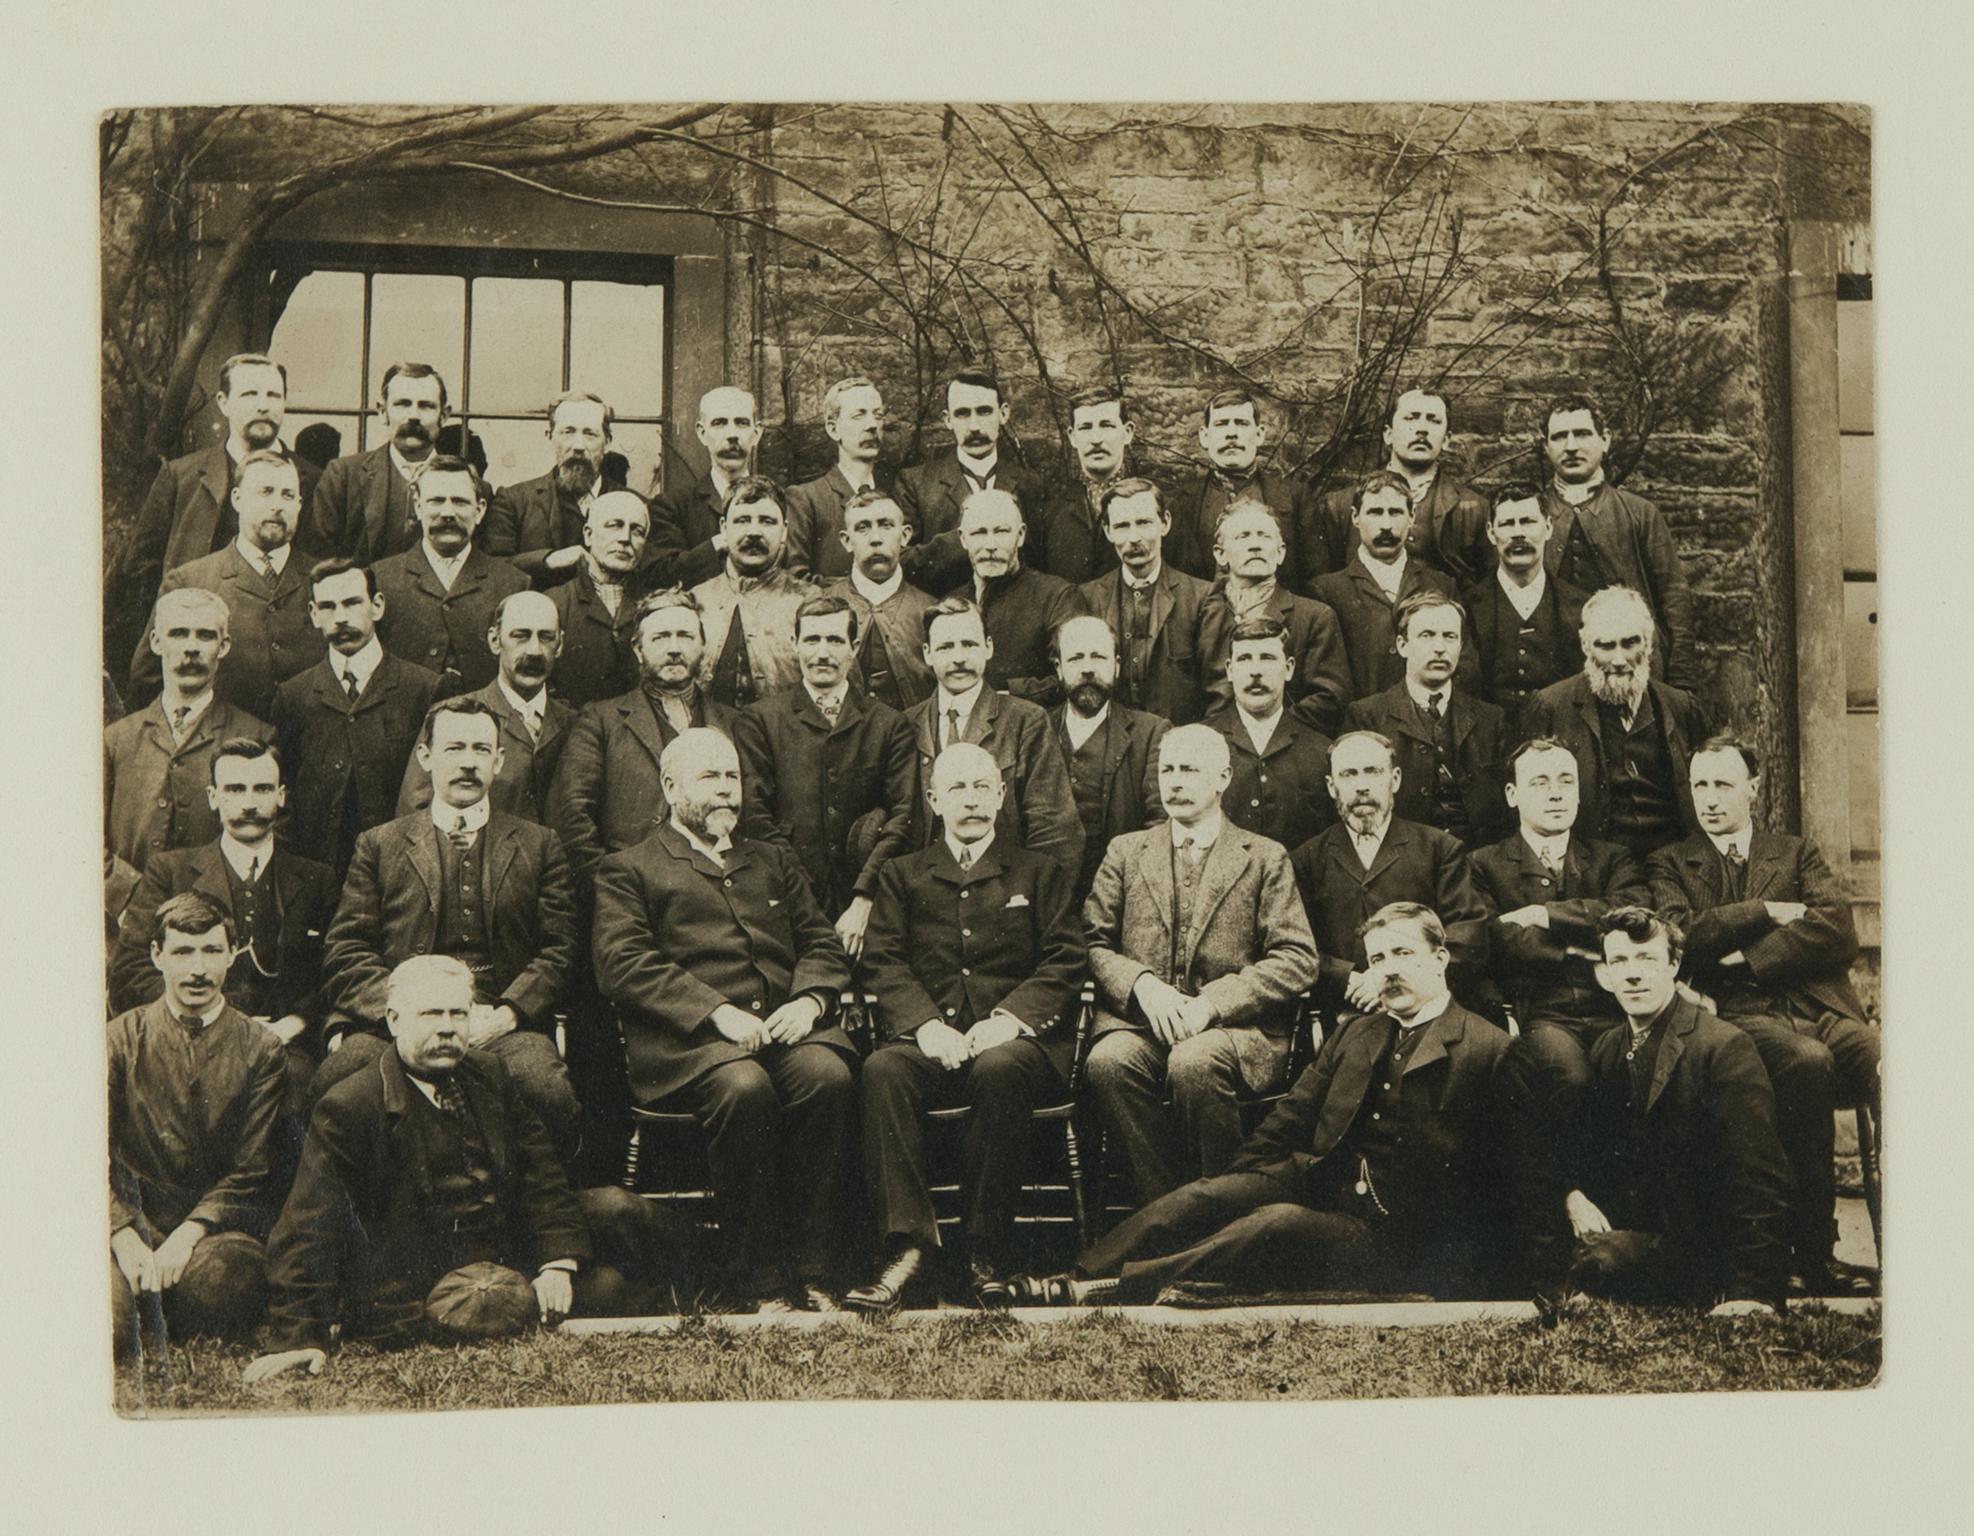 Brymbo works office staff, photograph